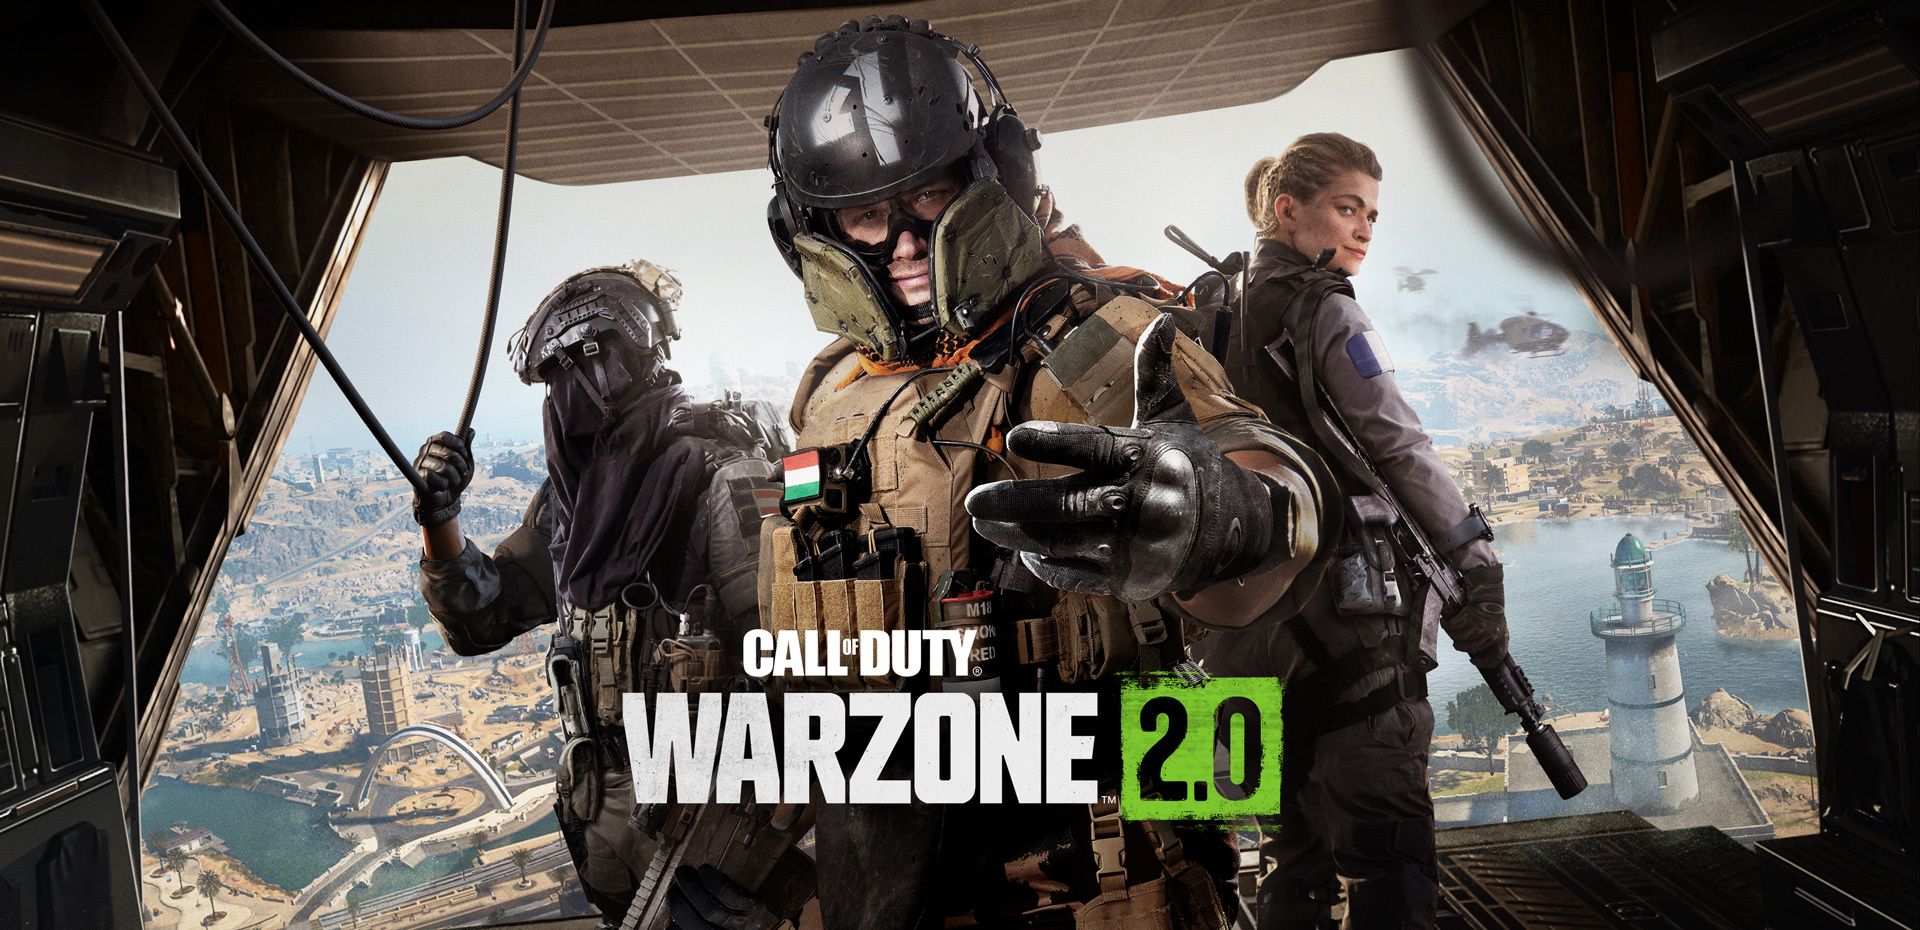 Today, we are going to be covering how to fix Warzone 2 mic not working, so you can play the game while communicating with your friends without any issues.